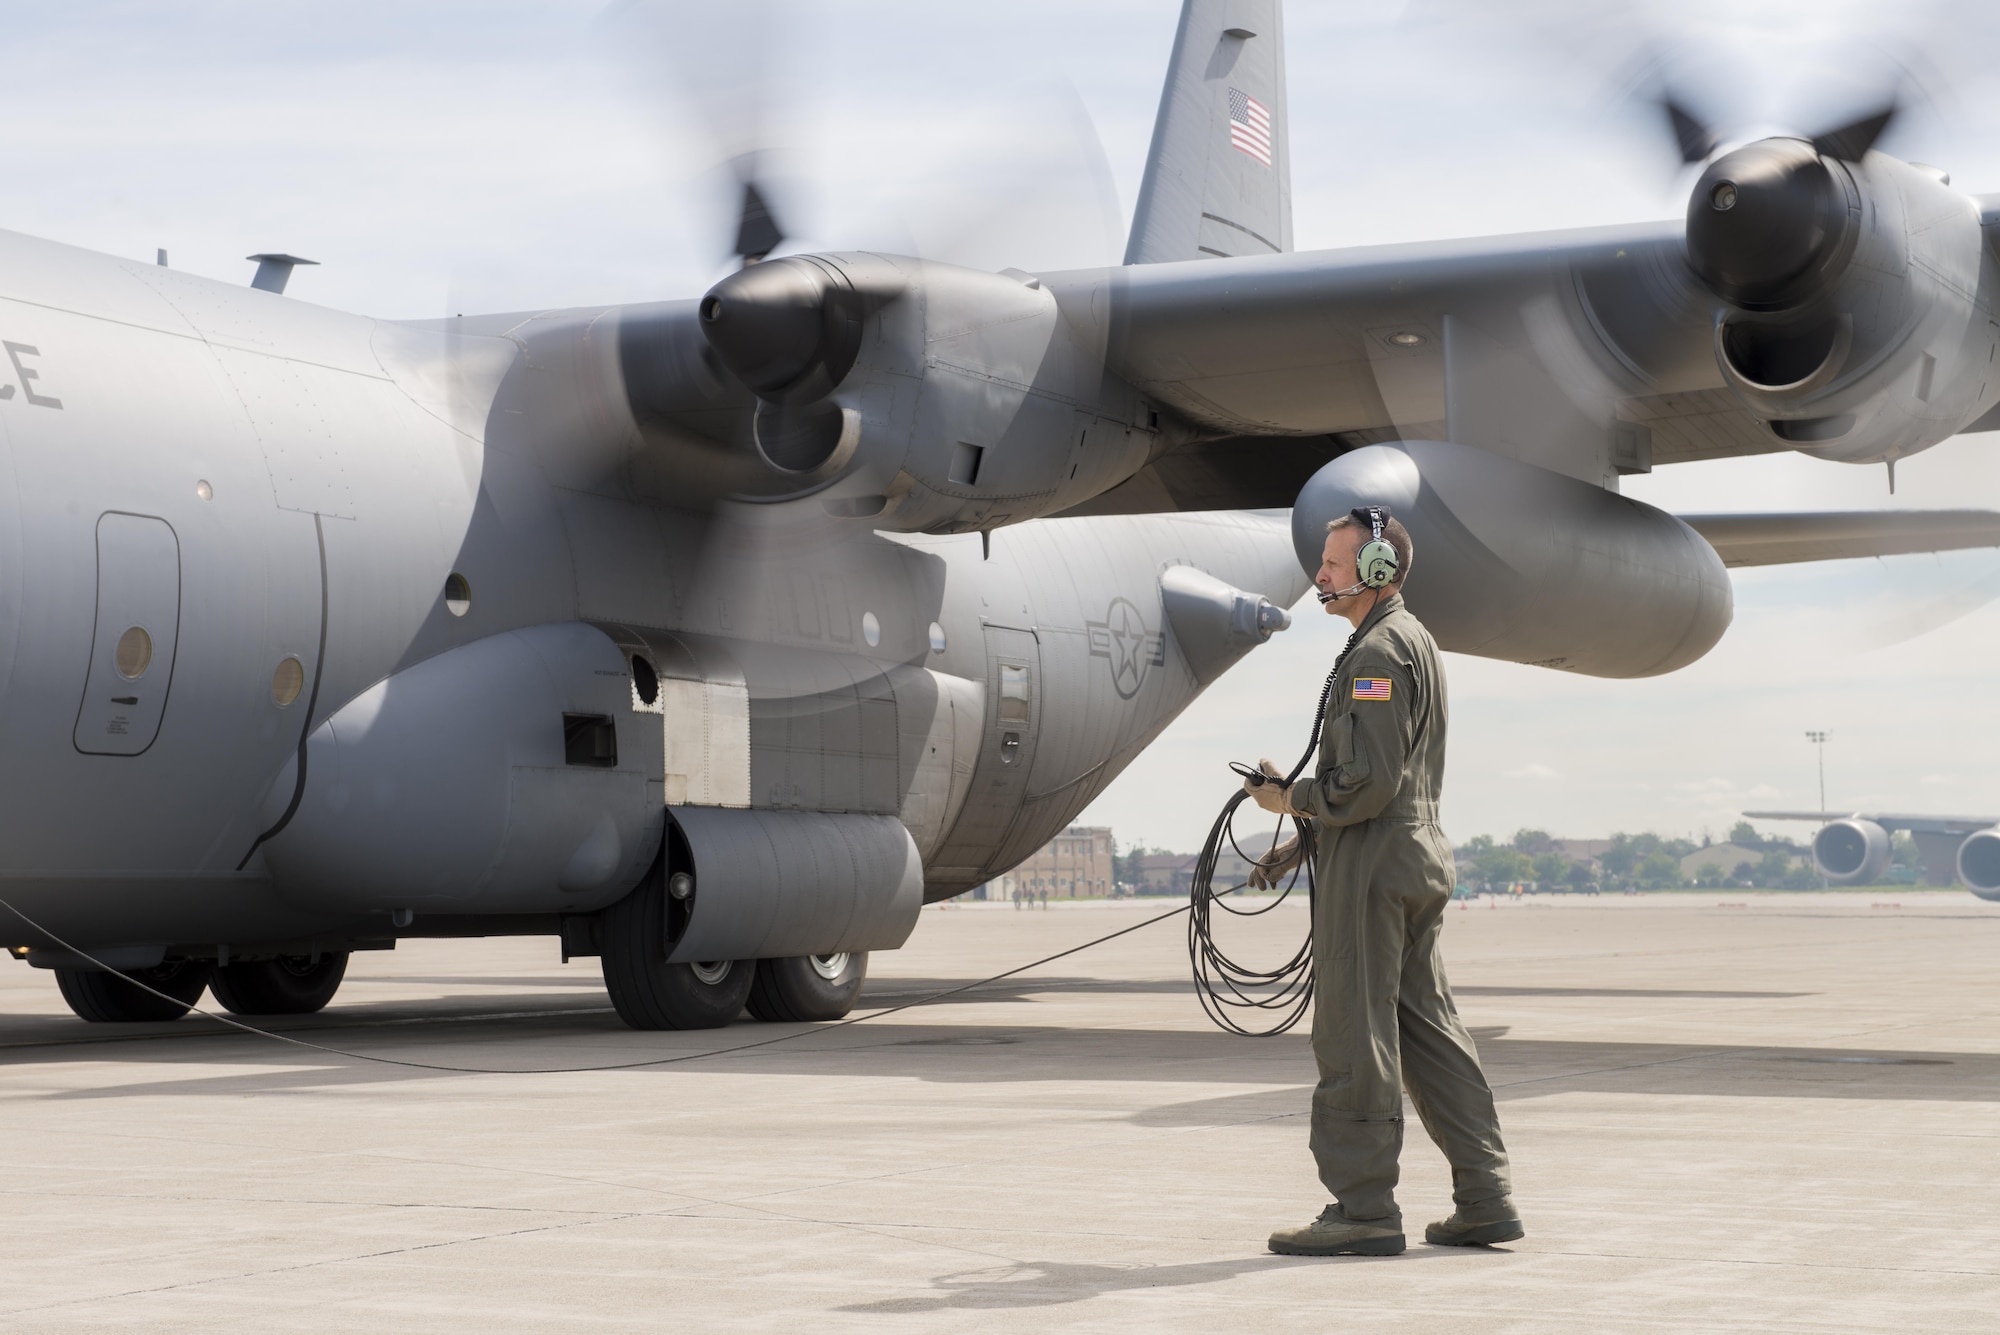 Senior Master Sgt. Eric Hady, 328th Air Refueling Squadron, prepares for the final departure of the last remaining C-130 Hercules from Niagara Falls Air Reserve Station, N.Y., July 26, 2017. This is a significant stage in the process of transition for the 914th, from an Airlift Wing to an Air Refueling Wing. (U.S. Air Force photo by Steph Sawyer)